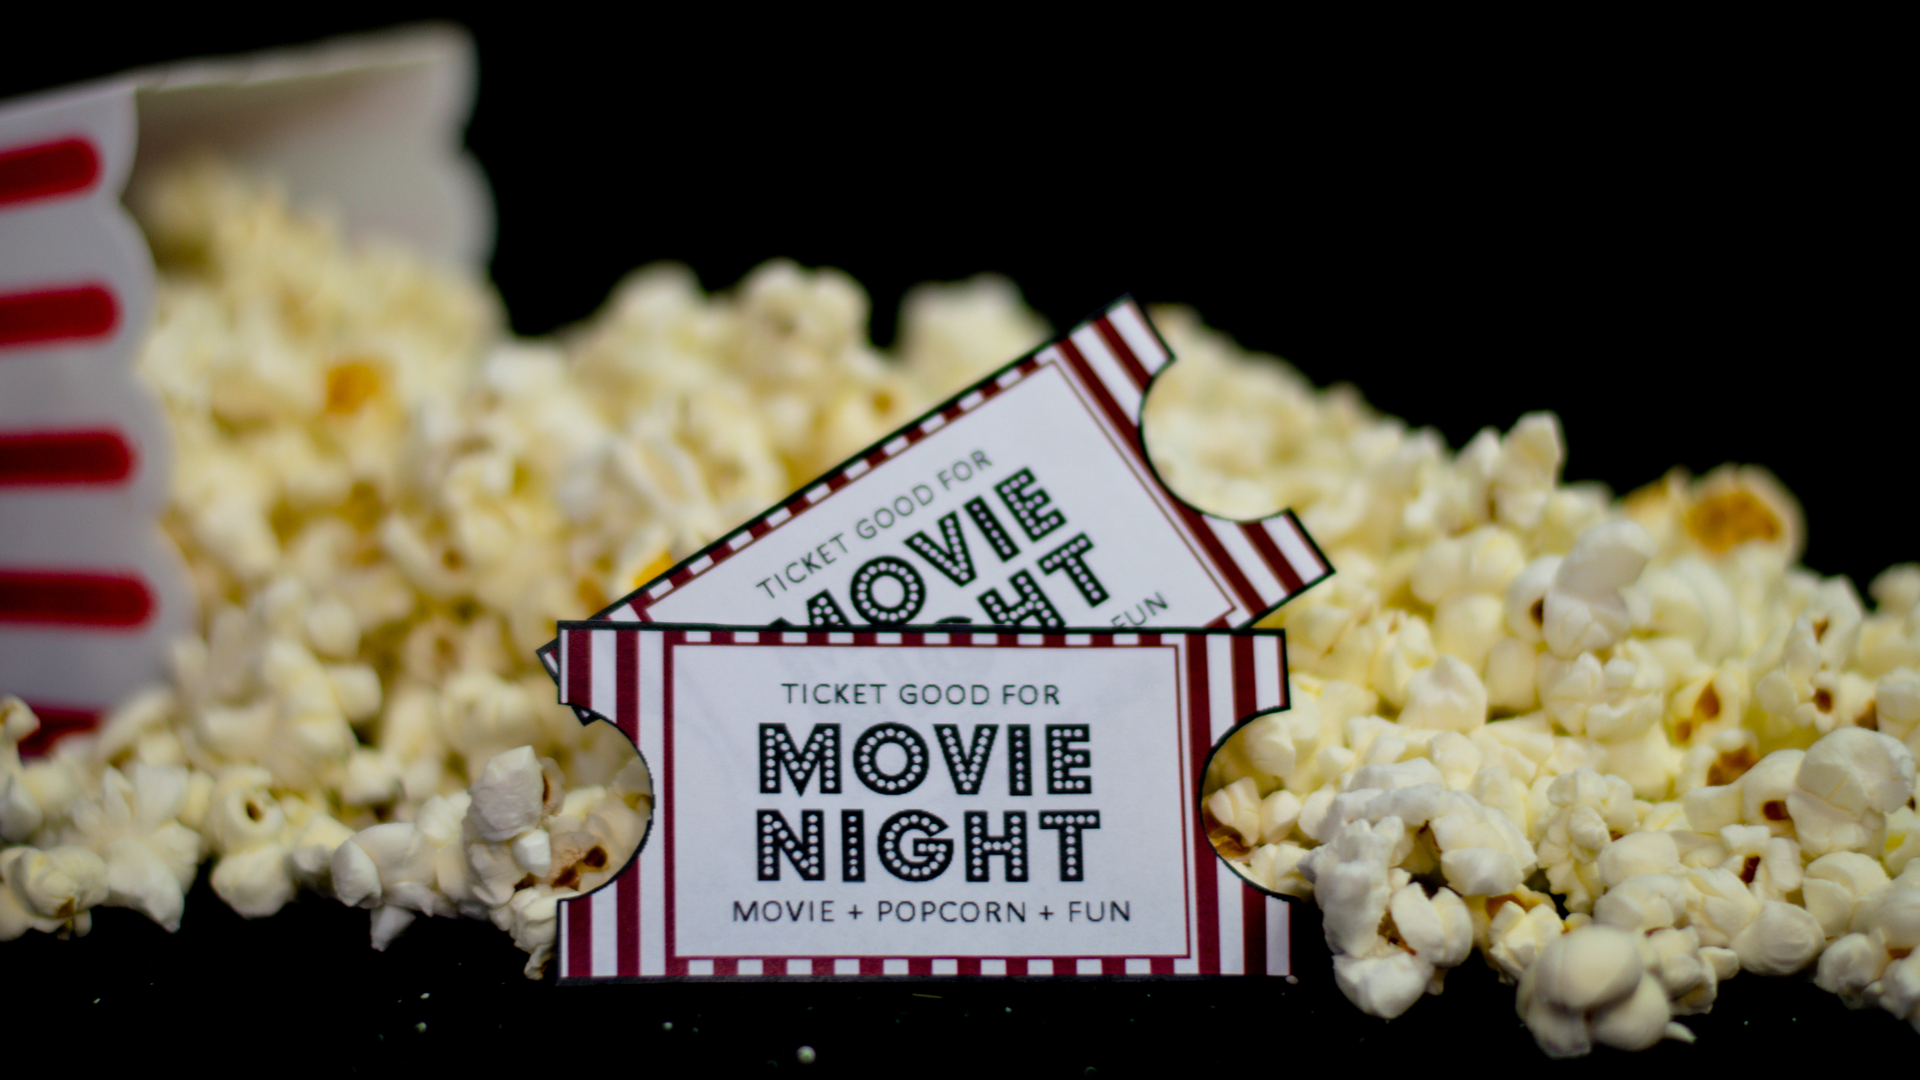 Outdoor Movies in Winter? Yes, It's Possible!